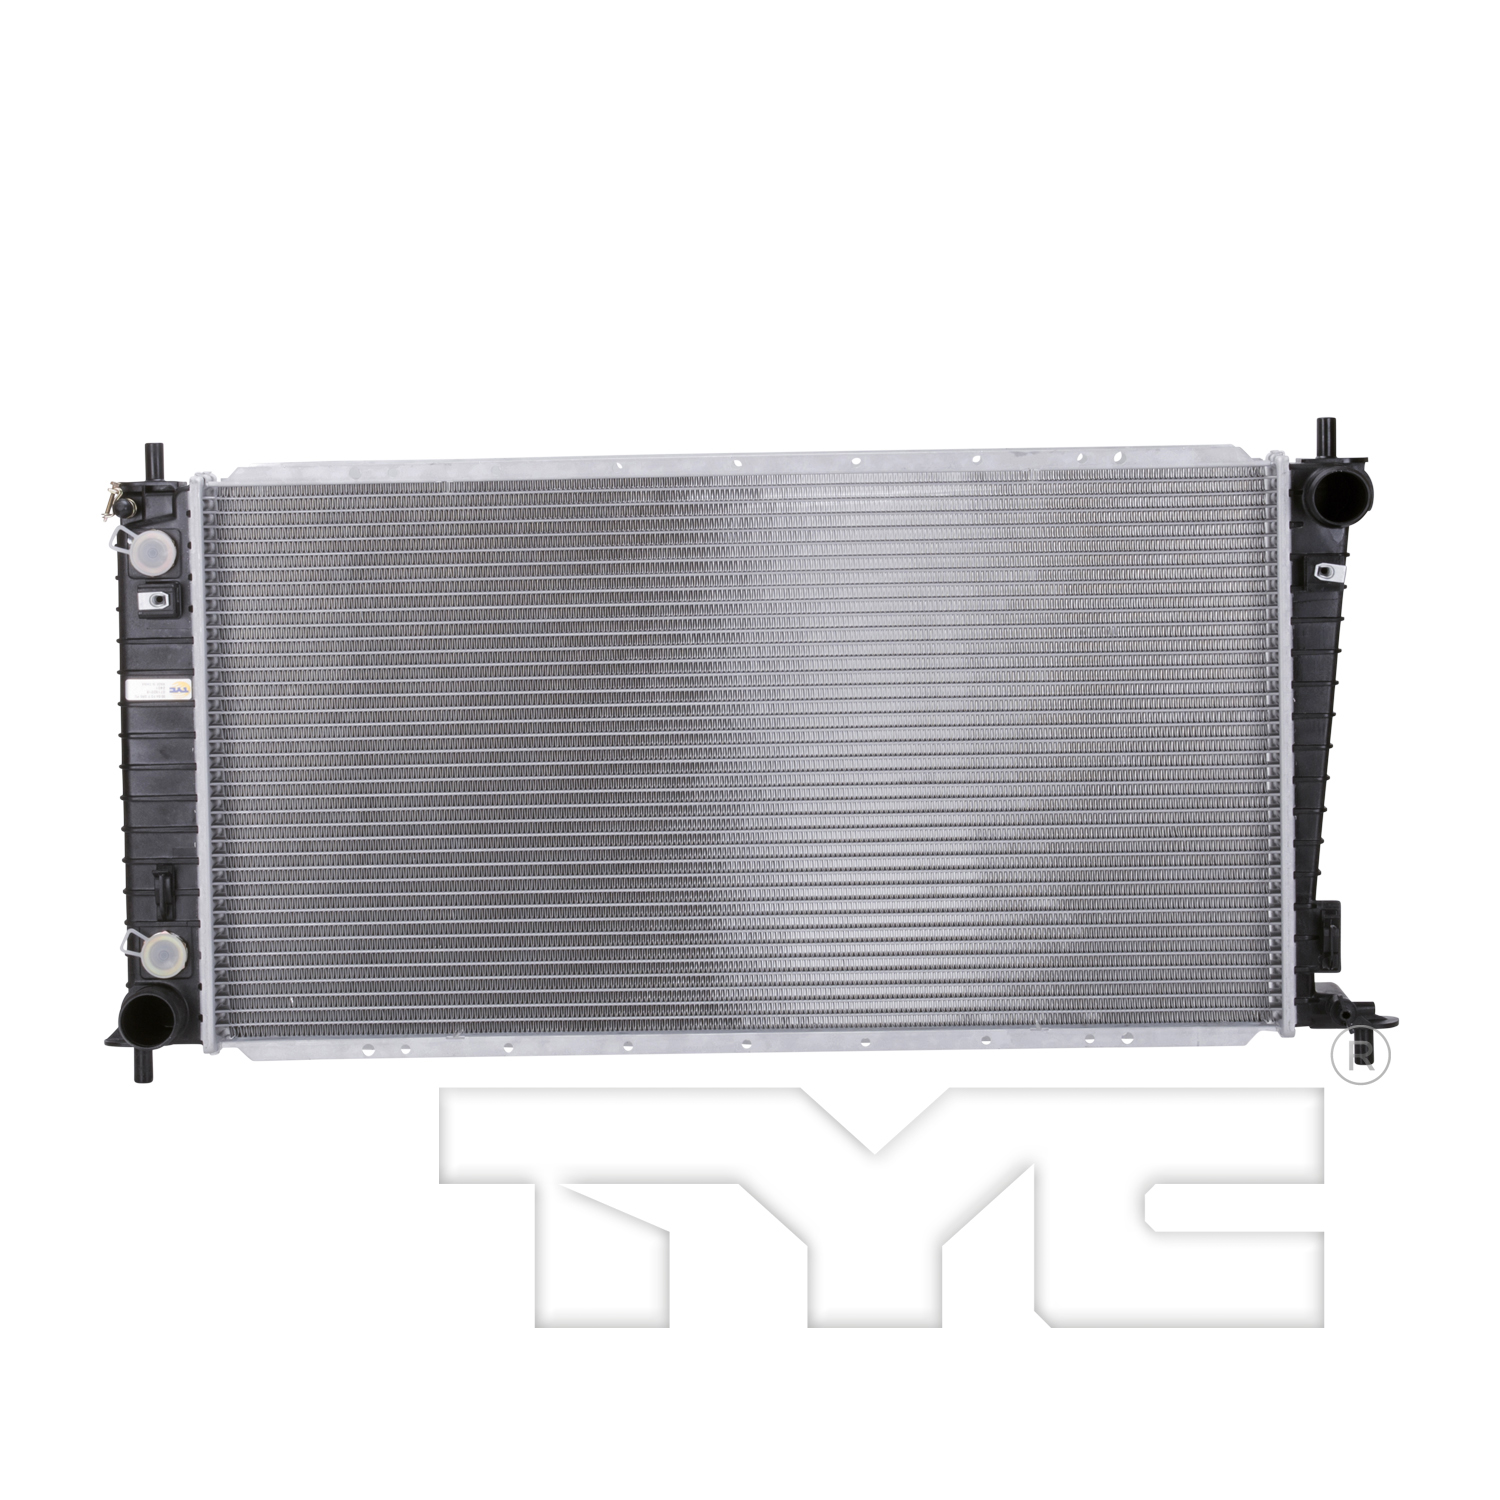 Aftermarket RADIATORS for FORD - F-150 HERITAGE, F-150 HERITAGE,04-04,Radiator assembly